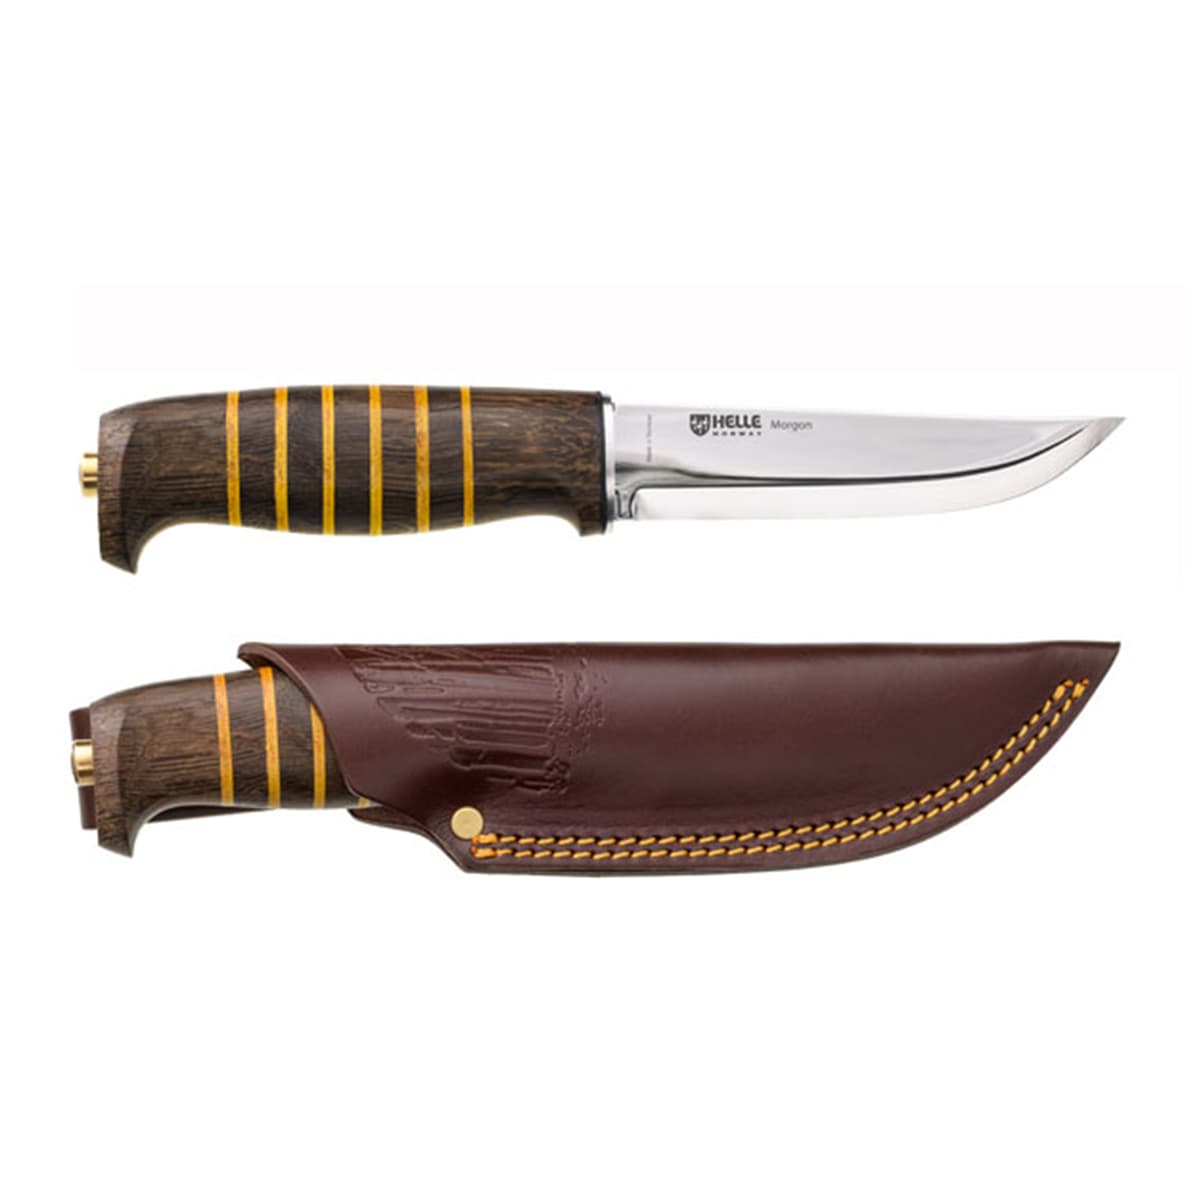 Helle Morgon Knife - Limited Edition